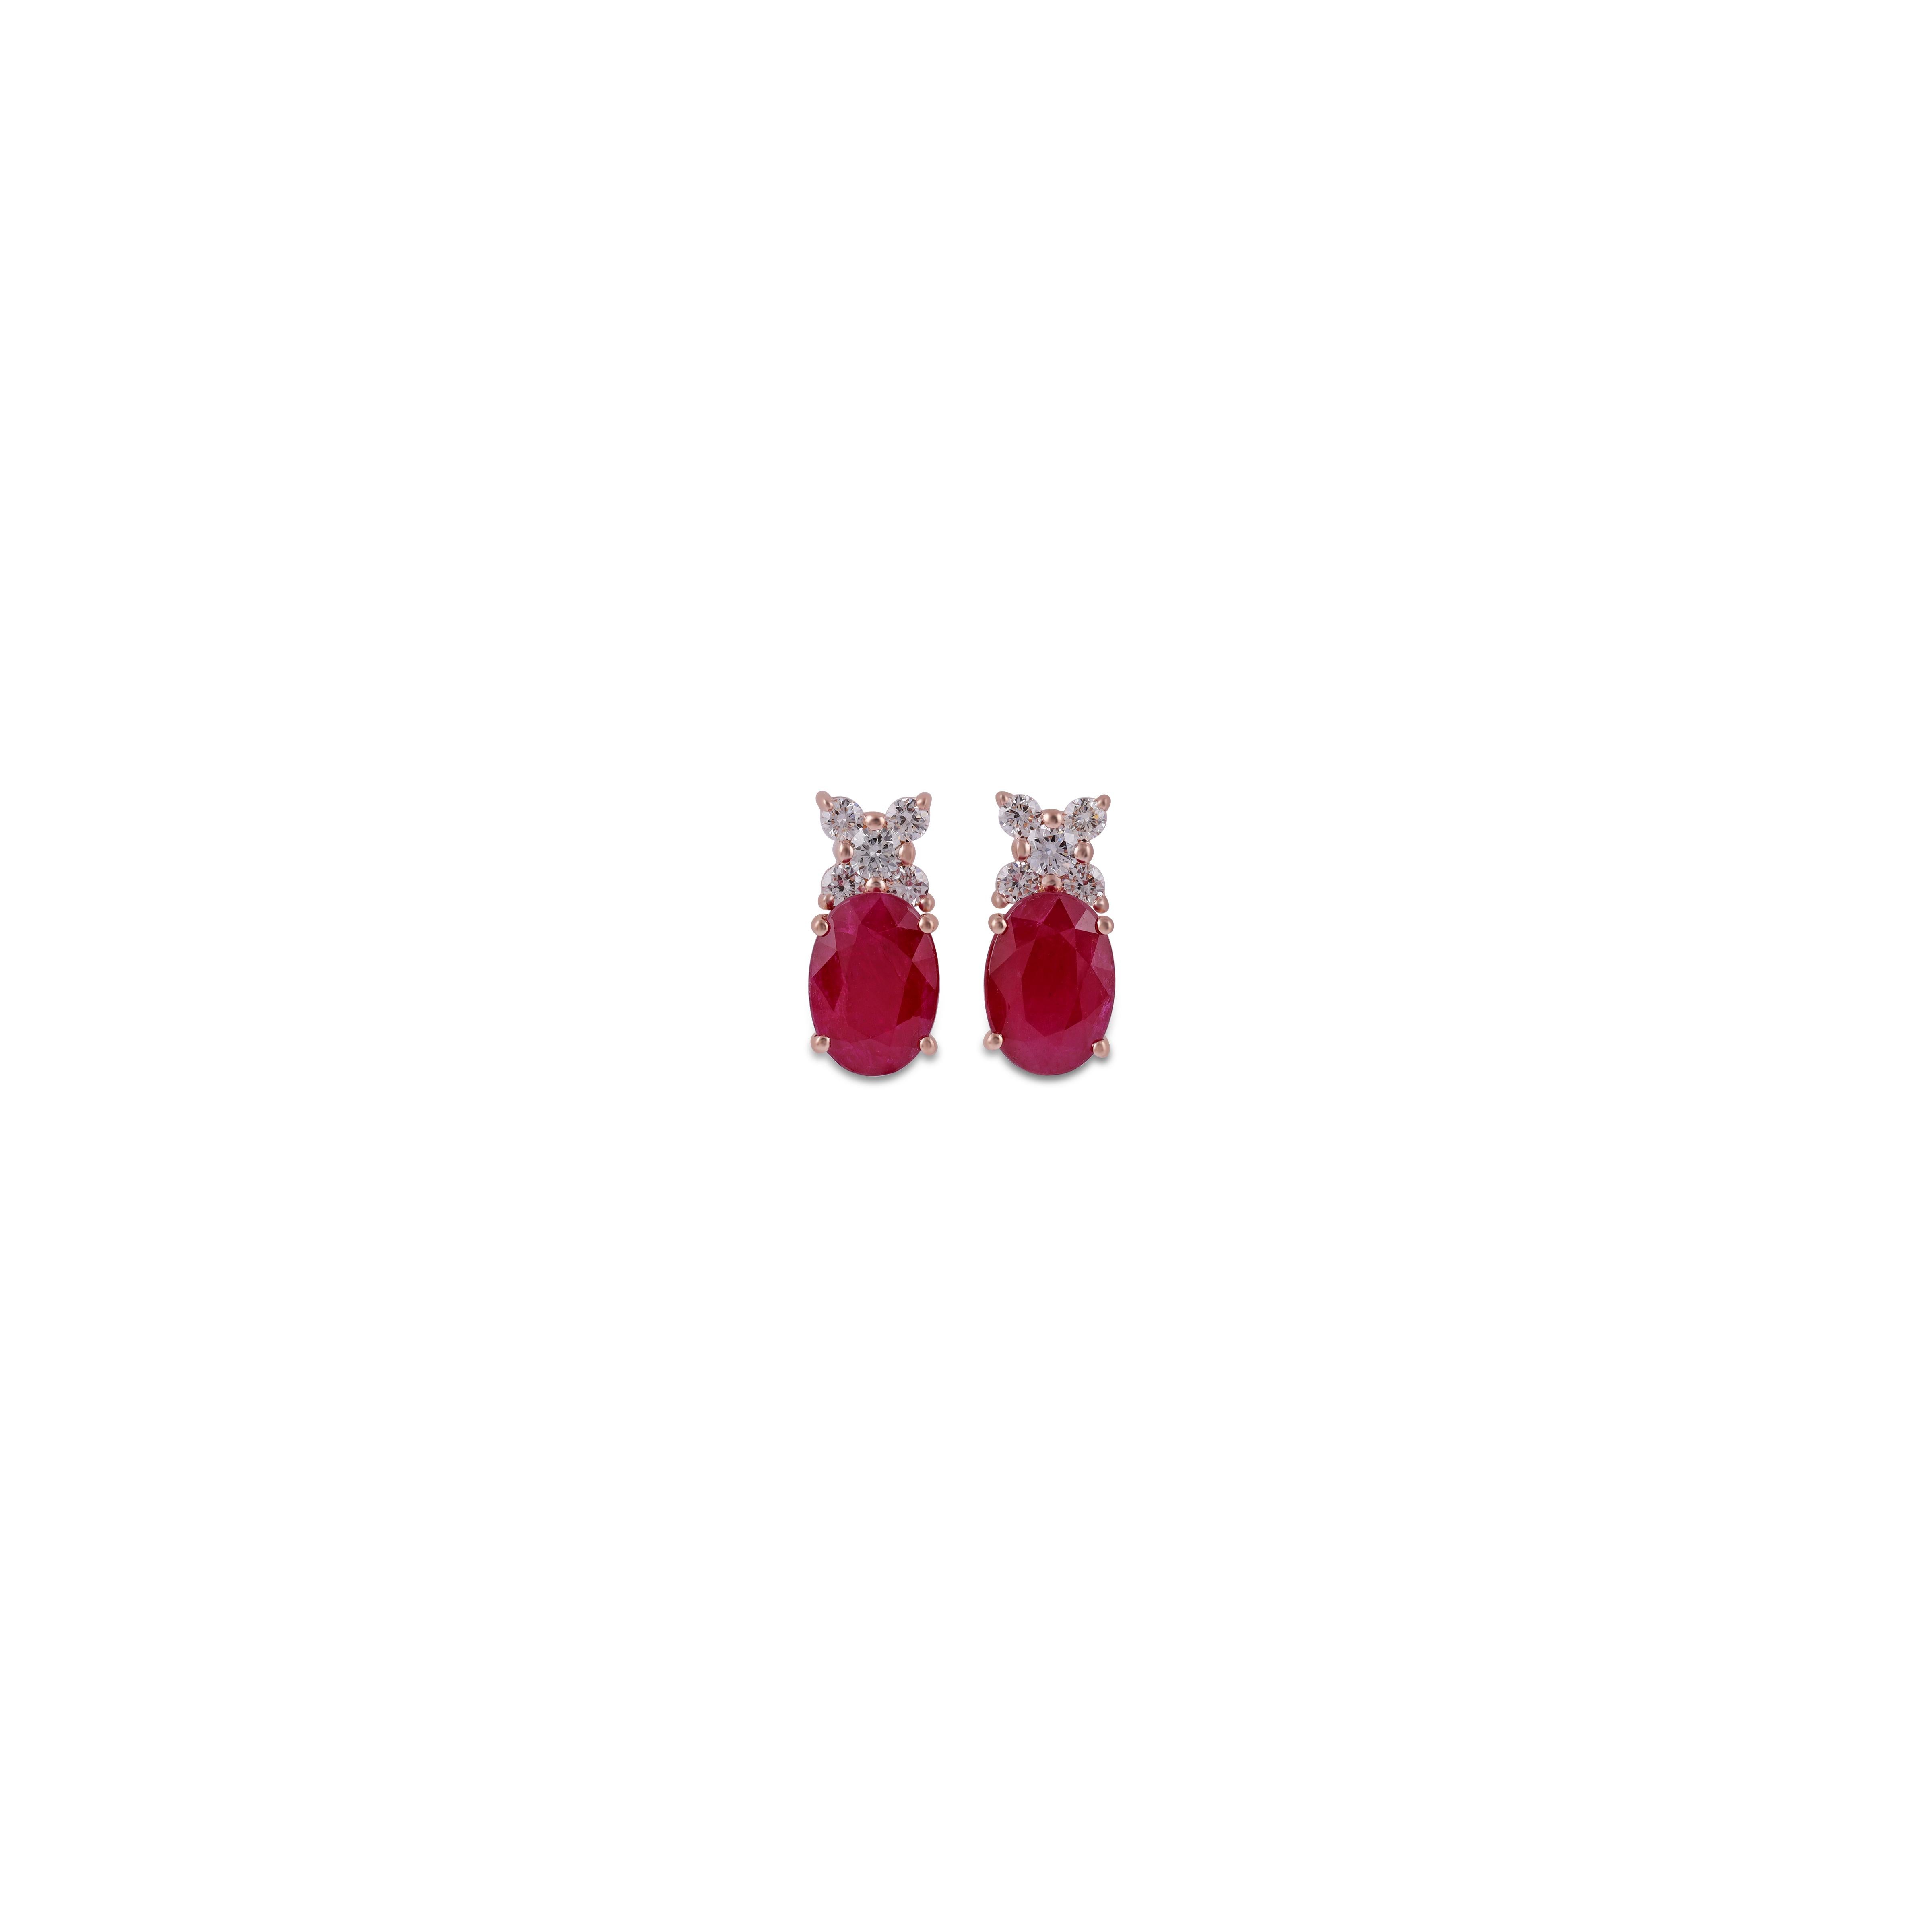 This is an elegant Ruby & diamond Earring studded in 18k Rose gold with 2 piece of oval Cut  shaped Mozambique Ruby weight 5.03 carat With 10 pieces of round shaped diamonds weight 0.54 carat.
This entire Earring  studded in 18k Rose gold weight